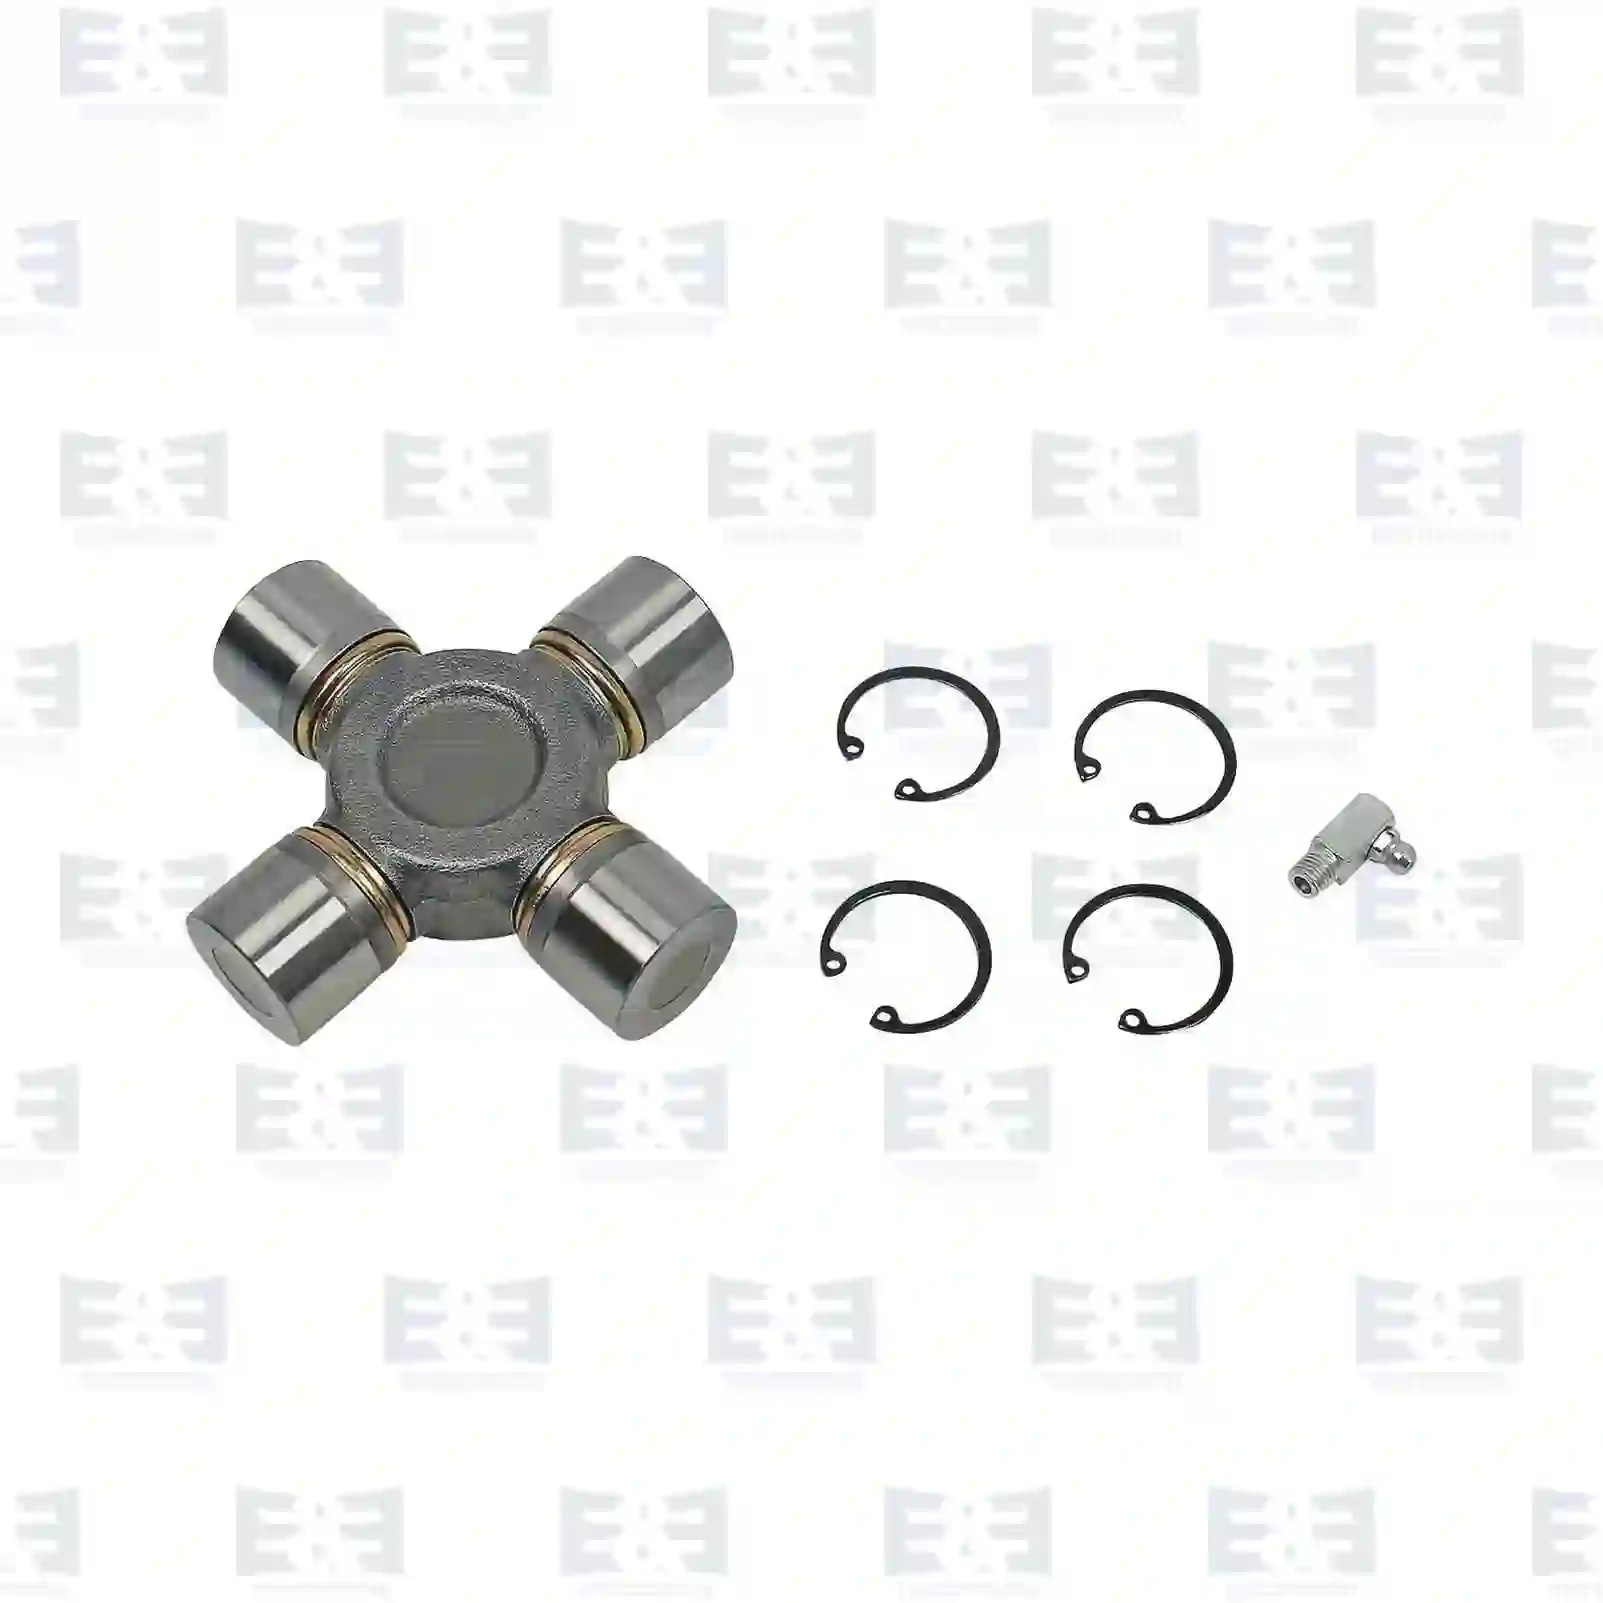 Joint Cross Joint cross, EE No 2E2276959 ,  oem no:9704100031, ZG30662-0008 E&E Truck Spare Parts | Truck Spare Parts, Auotomotive Spare Parts